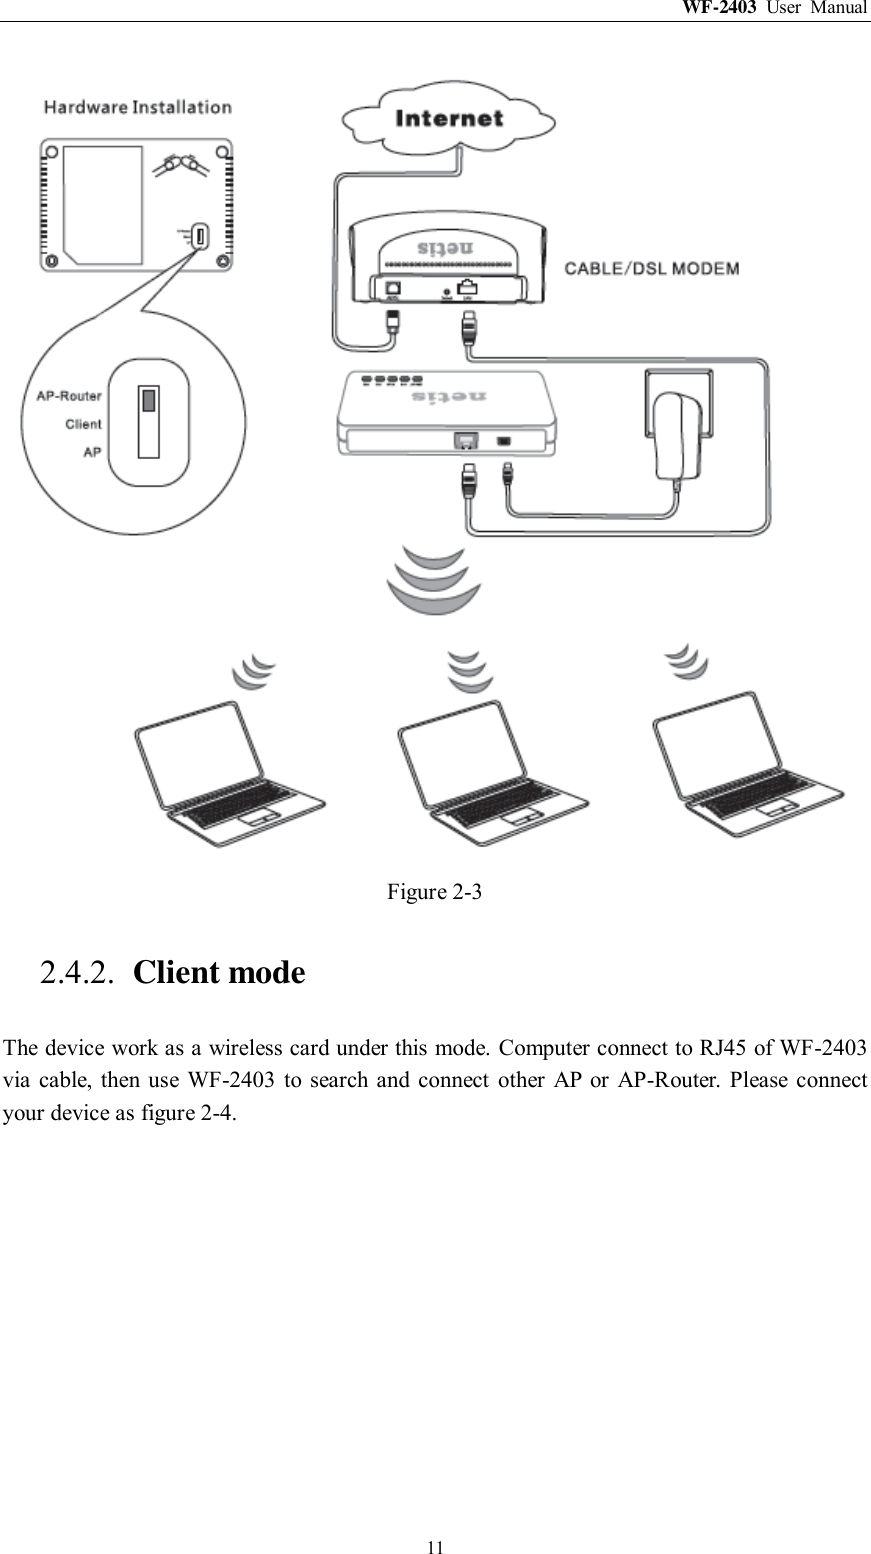 WF-2403  User  Manual  11  Figure 2-3 2.4.2. Client mode The device work as a wireless card under this mode. Computer connect to RJ45 of WF-2403 via  cable,  then use  WF-2403  to  search  and  connect  other  AP  or AP-Router.  Please  connect your device as figure 2-4. 